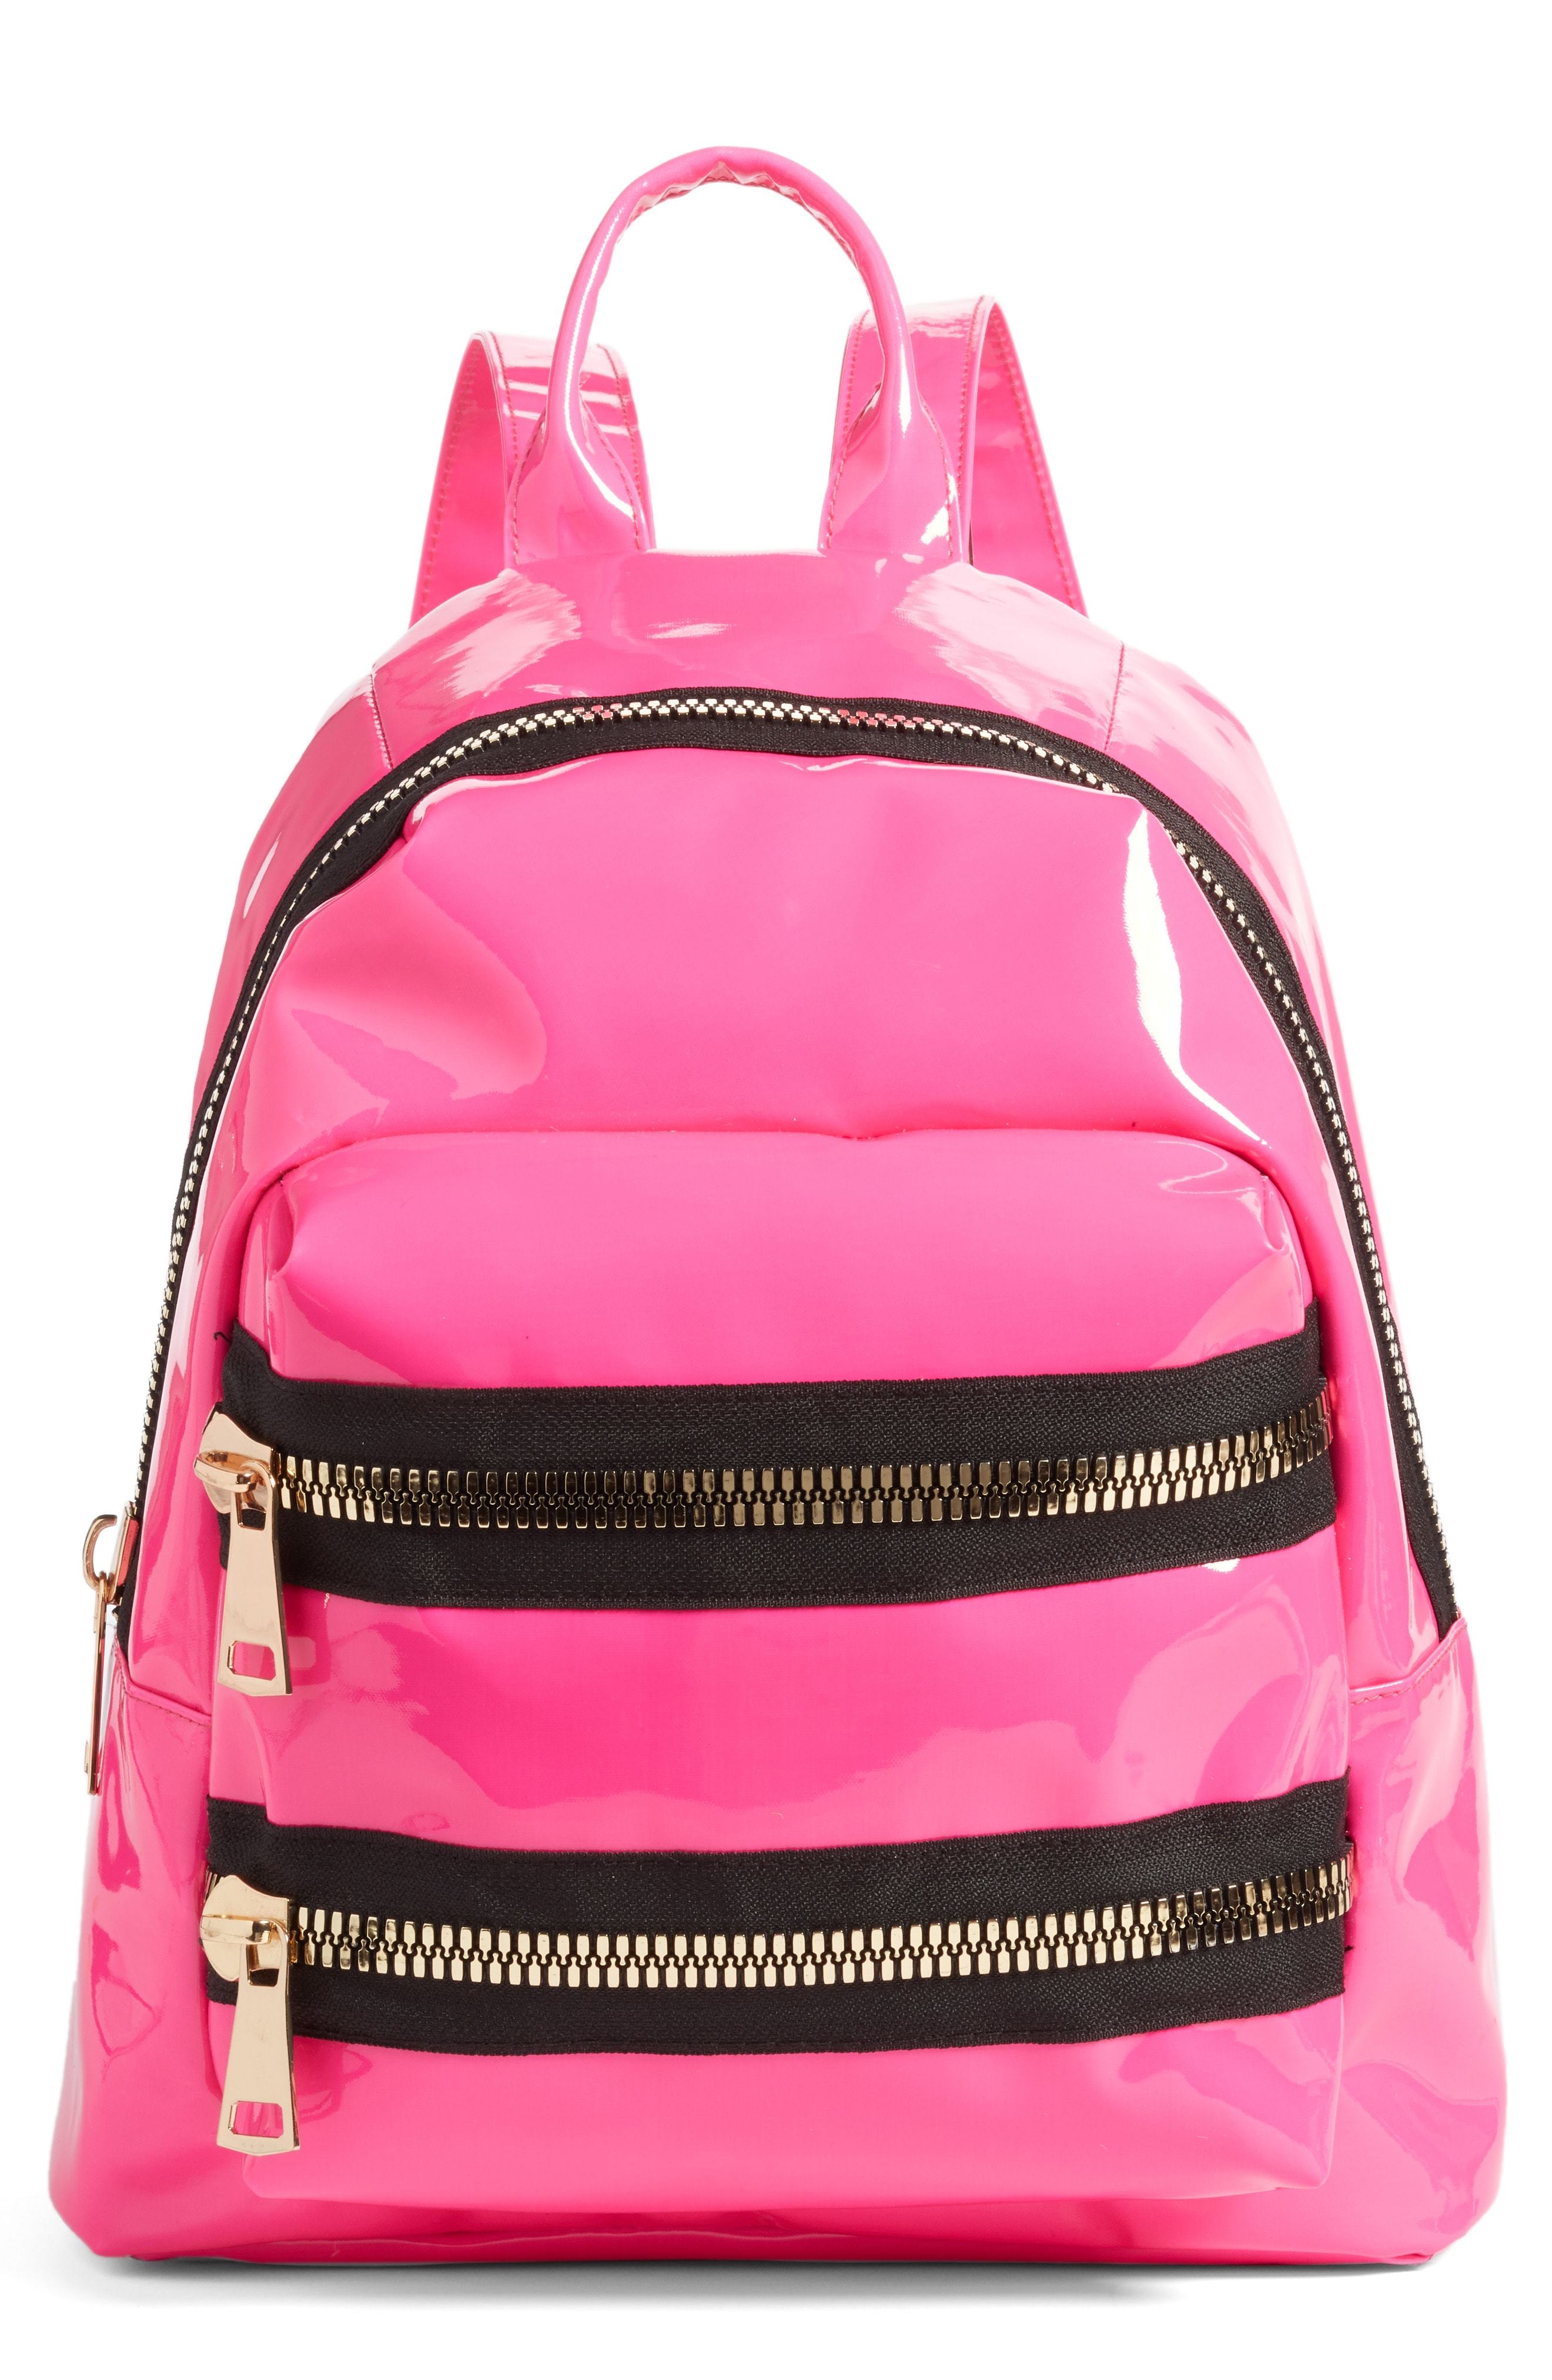 Jane & Berry Double Zip Faux Patent Leather Backpack, $26, Nordstrom